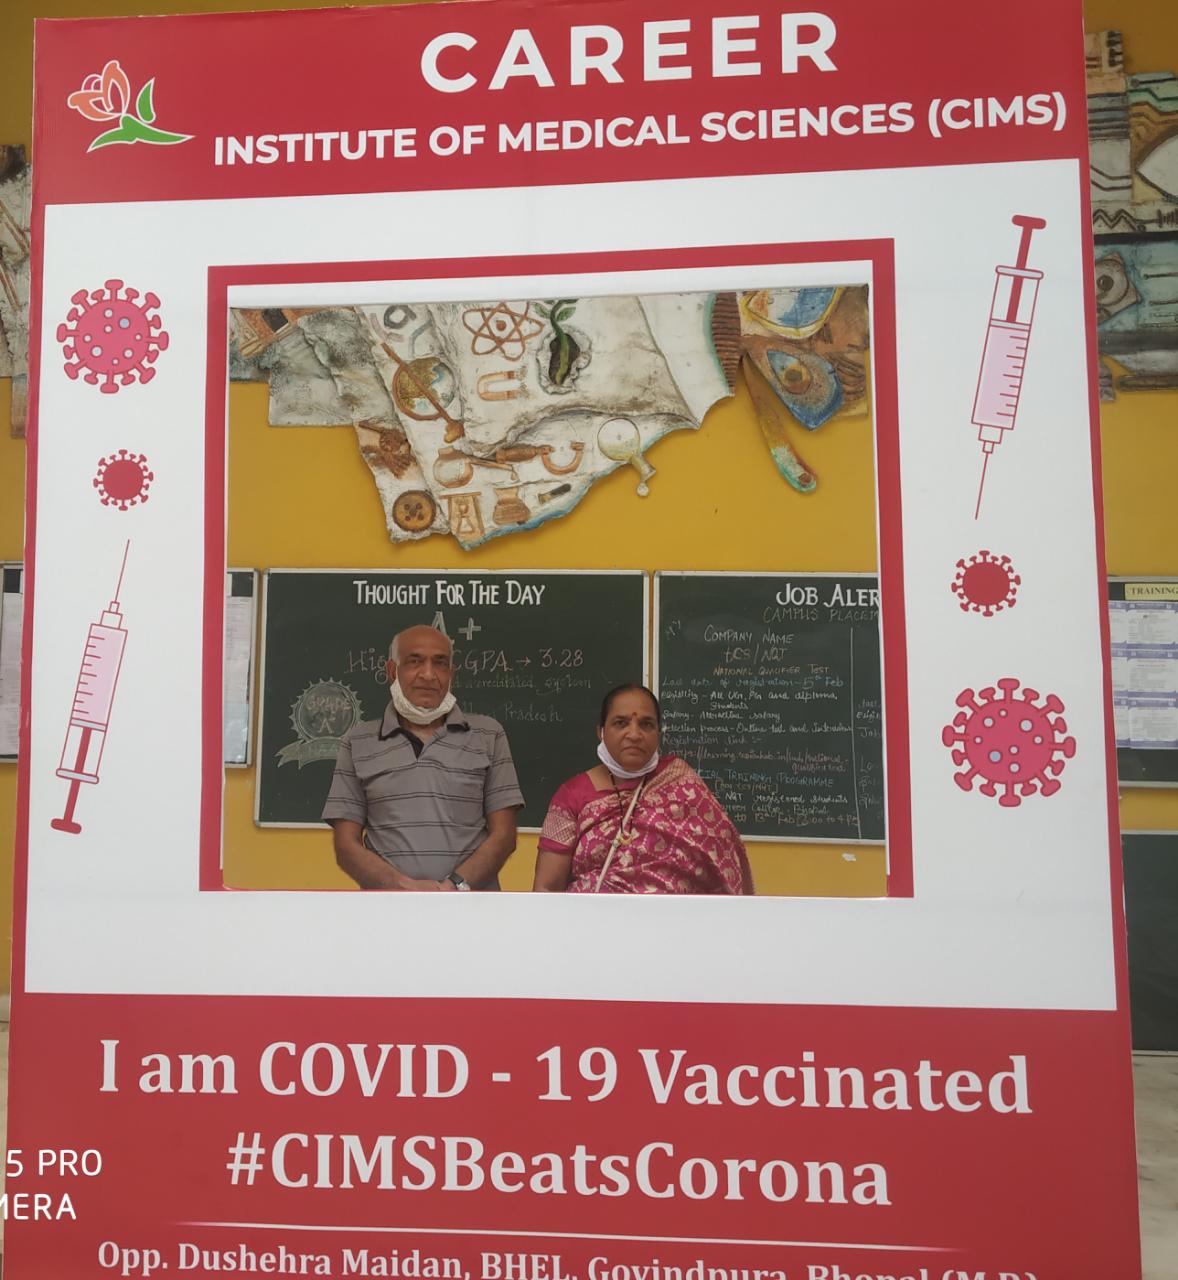 Covid-Vaccination Drive in Career Hospital, BHEL, Bhopal 